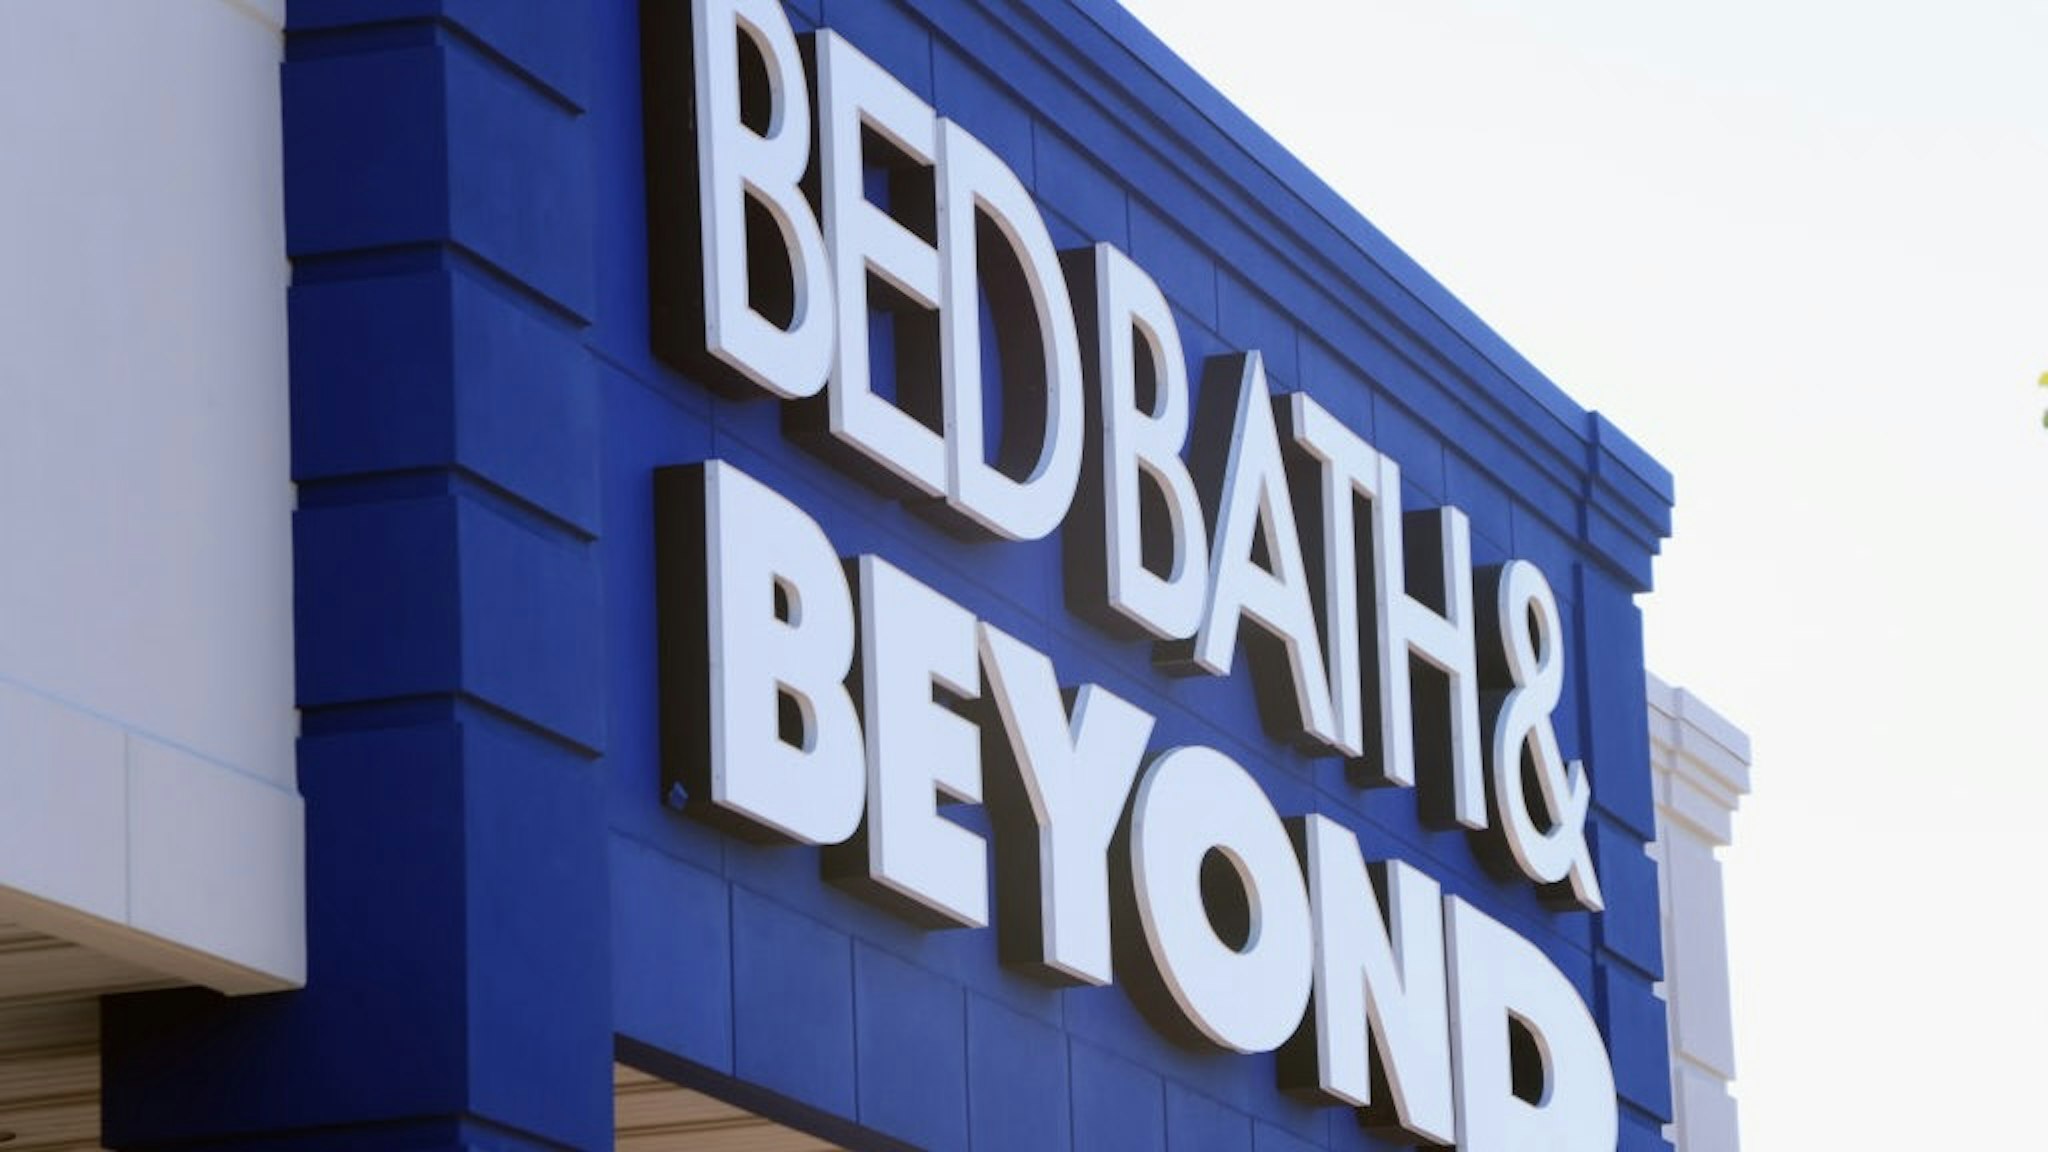 General Views of New York WESTBURY, NEW YORK - SEPTEMBER 15: A general view of a Bed Bath & Beyond store on September 15, 2022 in Westbury New York, United States. Many families along with businesses are suffering the effects of inflation as the economy is dictating a change in spending habits. (Photo by Bruce Bennett/Getty Images) Bruce Bennett / Staff